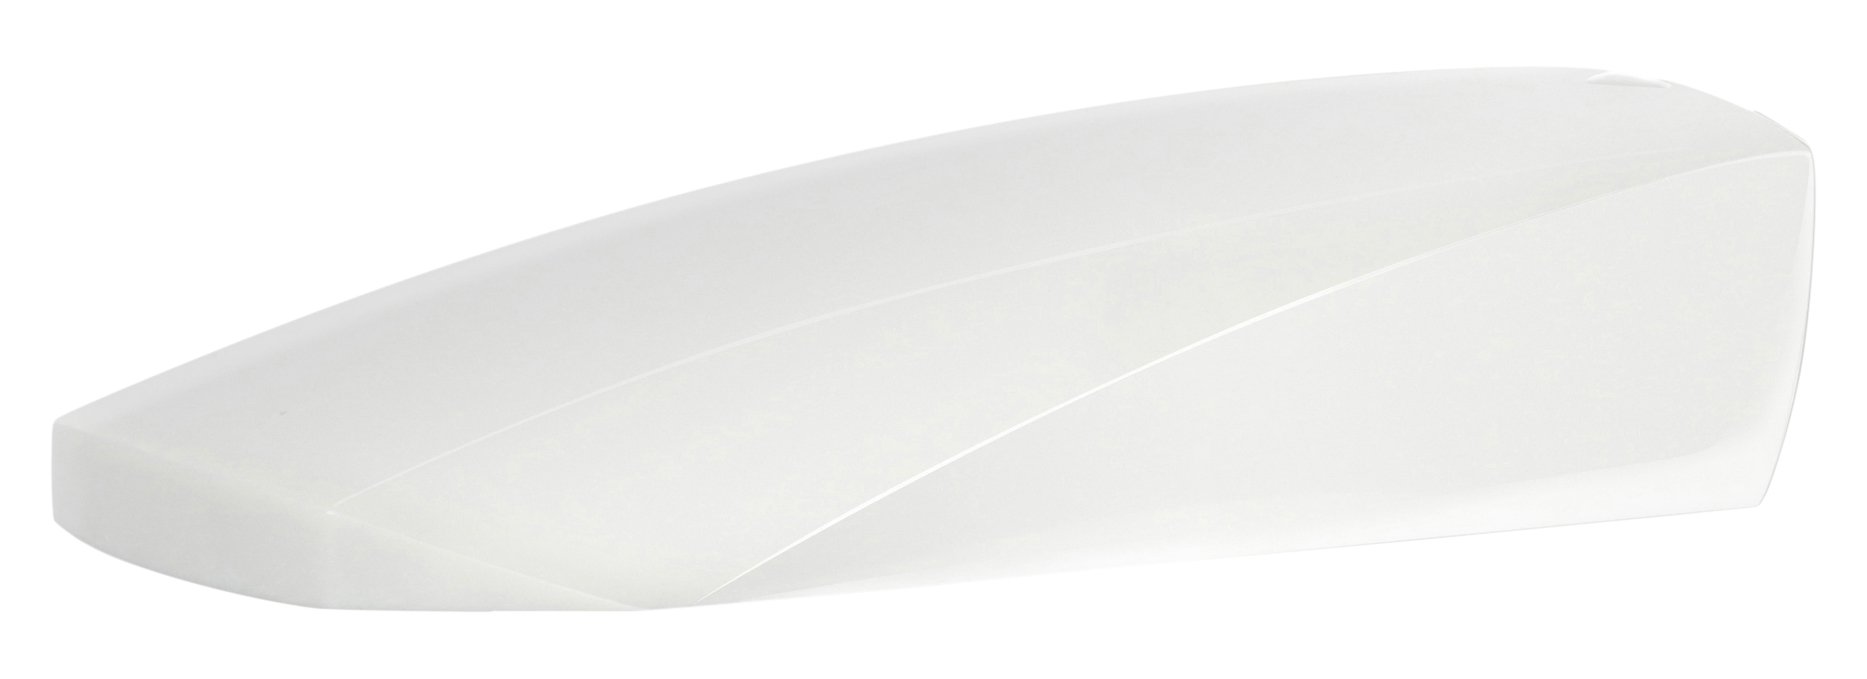 SHAD D1B23E08 White Cover lid for SH23, One Size von Shad